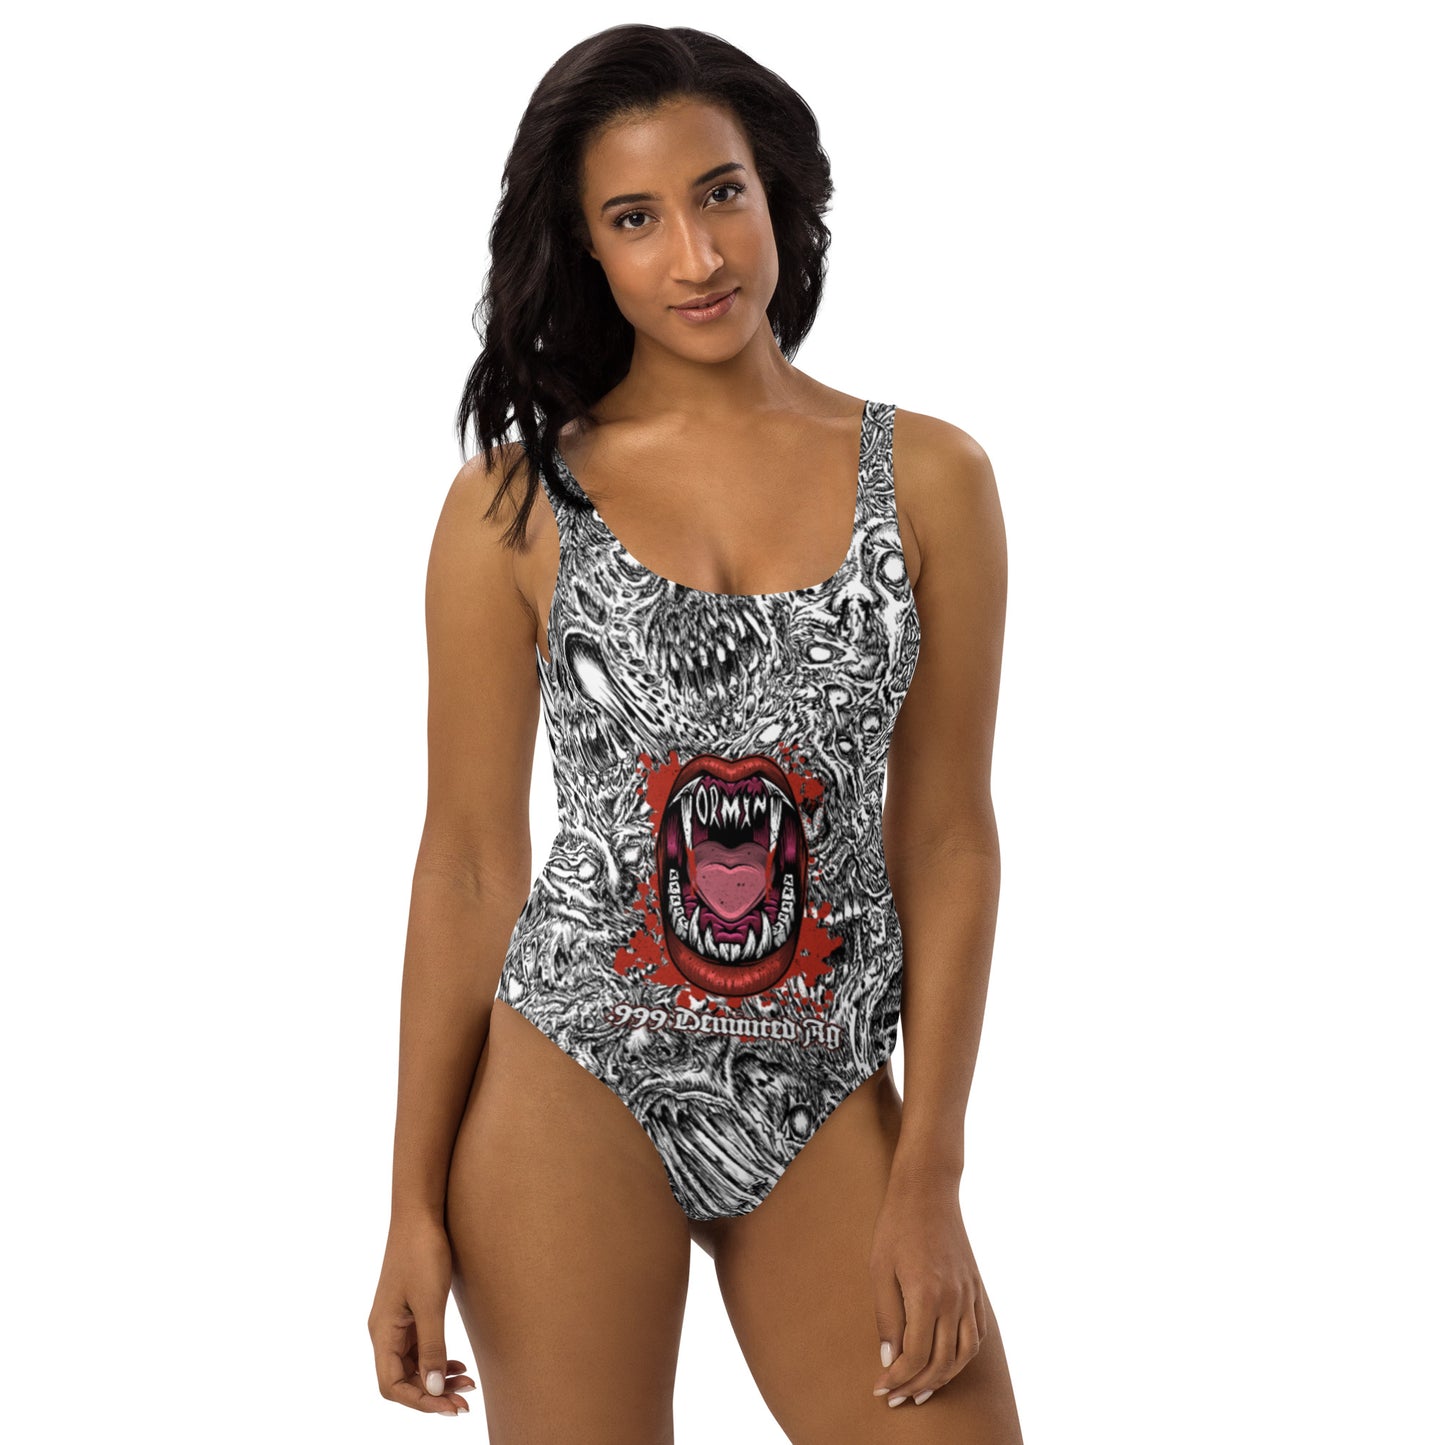 Tormint Mental Disorders w/ Vampire One-Piece Swimsuit